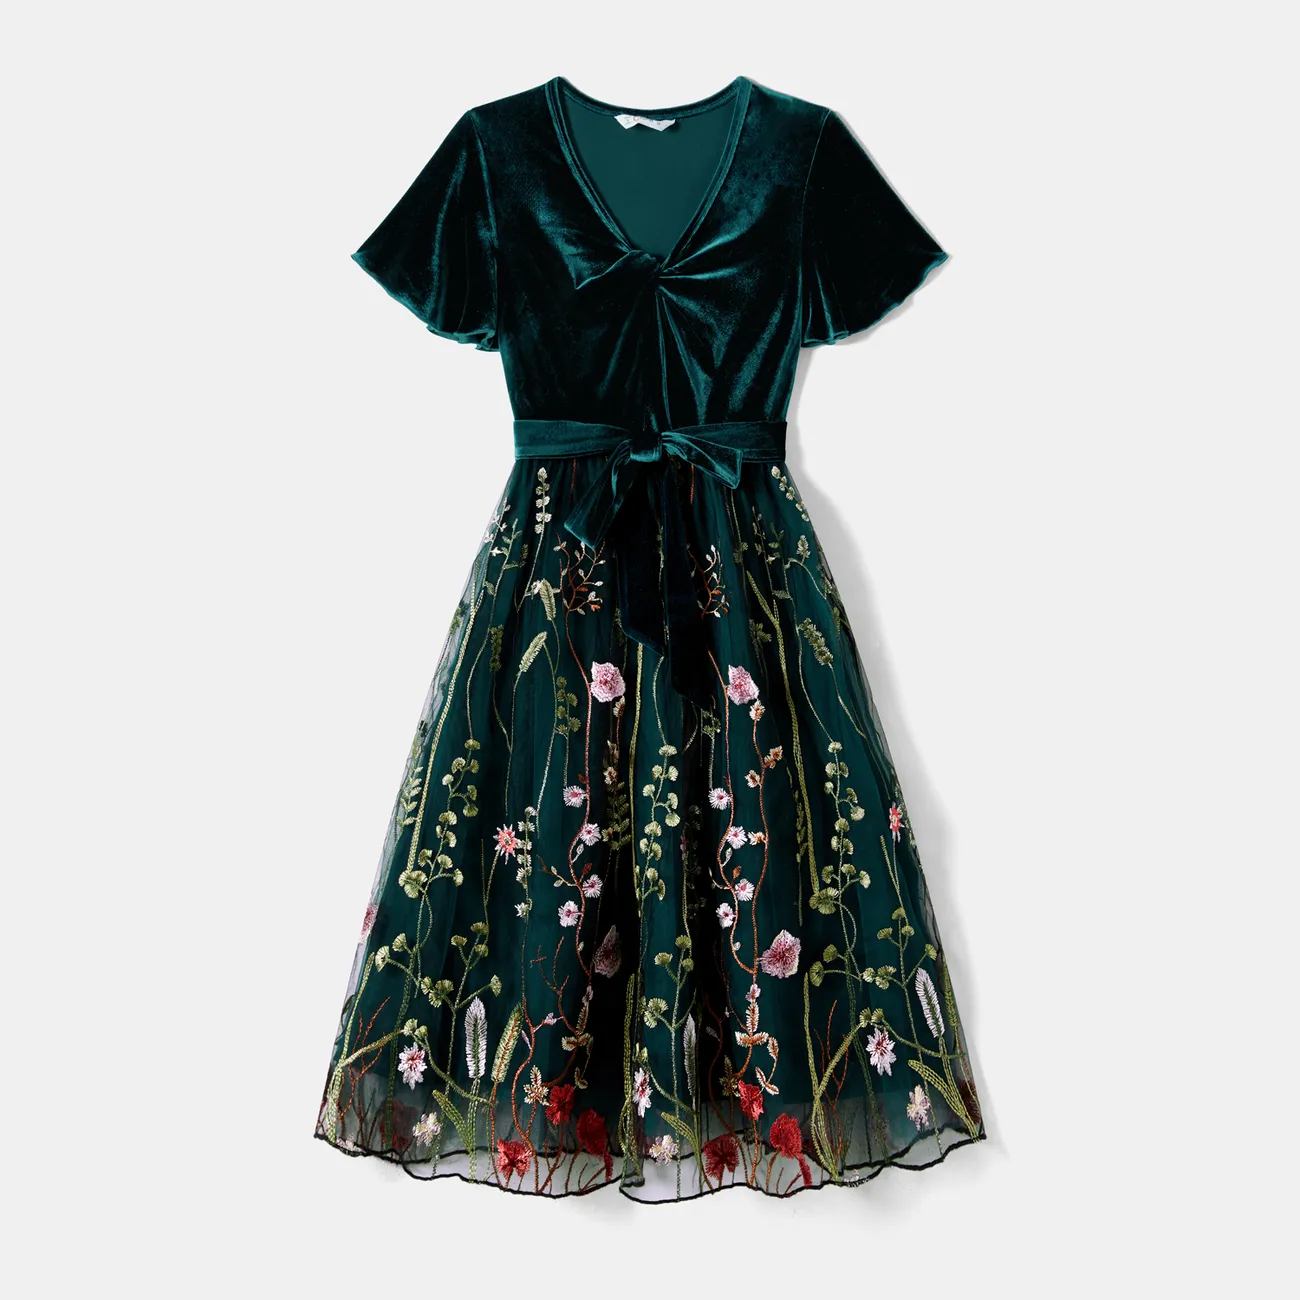 Mommy and Me Velet Splice Floral Embroidered Long-Sleeved Mesh Dresses Dark Green big image 1